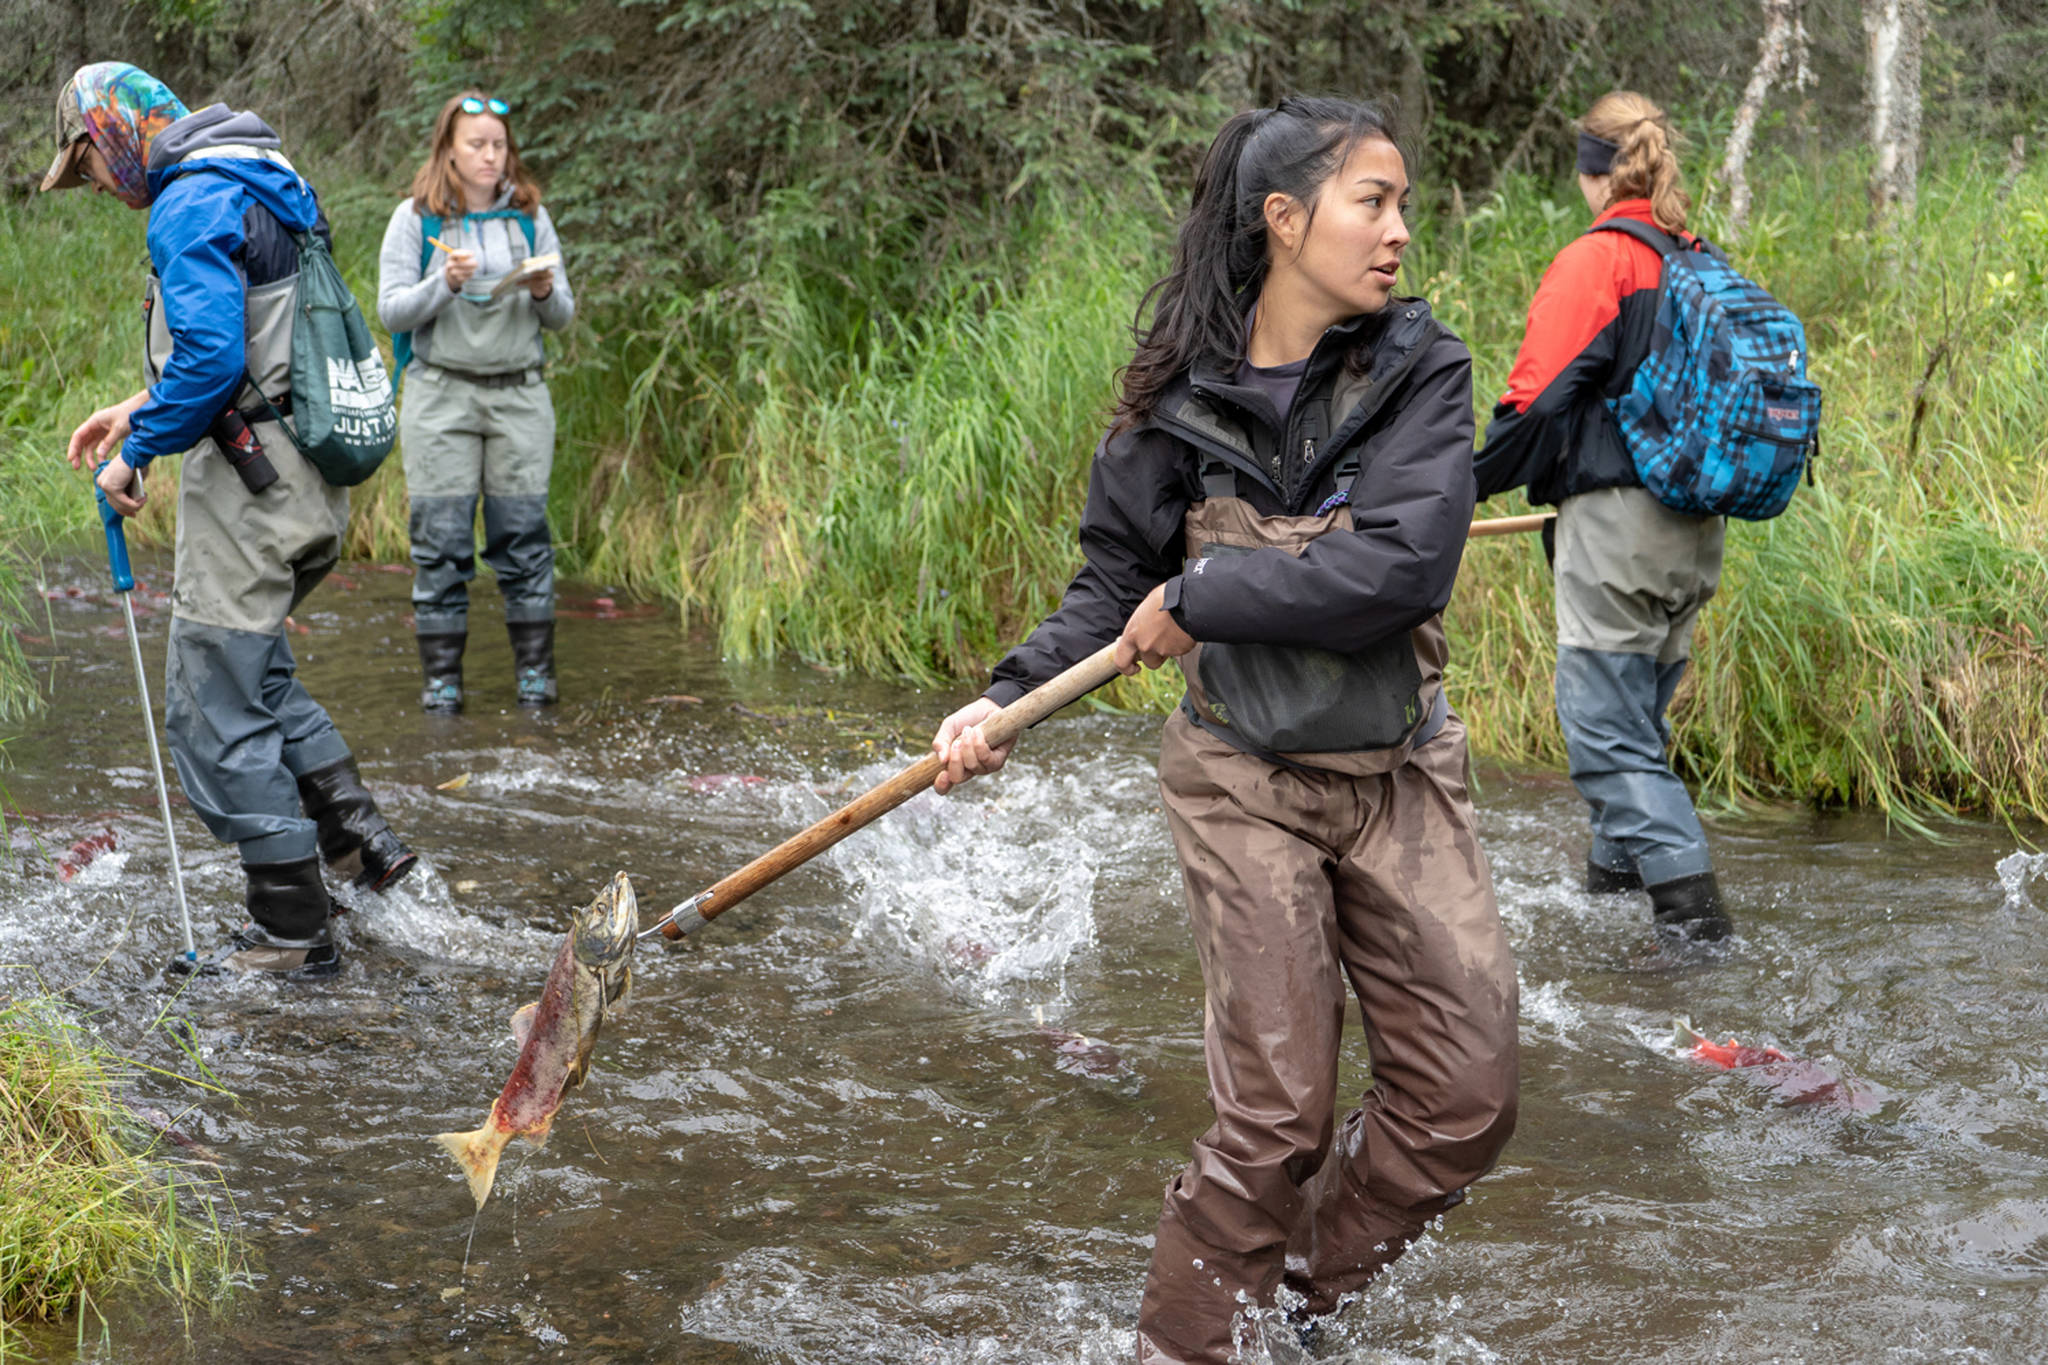 Andrea Odell, an undergraduate student in the University of Washington School of Aquatic and Fishery Sciences, tosses dead sockeye salmon onto the bank of Hansen Creek in southwest Alaska in August 2018 while other researchers record data and look for salmon in the stream. (Courtesy Photo | Dan DiNicola via University of Washington)